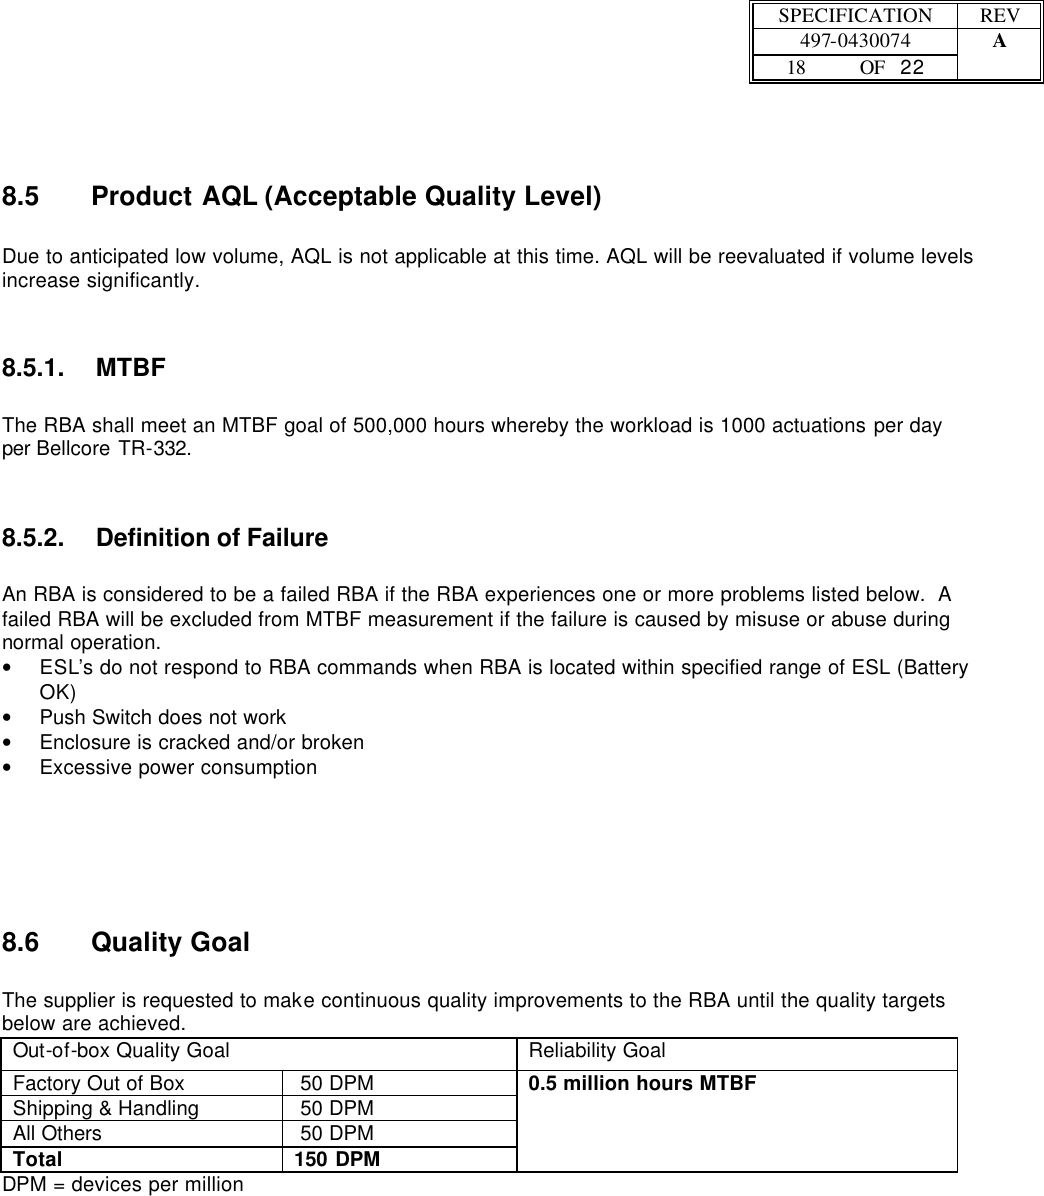  SPECIFICATION REV  497-0430074 A  18 OF   22    8.5 Product AQL (Acceptable Quality Level)  Due to anticipated low volume, AQL is not applicable at this time. AQL will be reevaluated if volume levels increase significantly. 8.5.1. MTBF   The RBA shall meet an MTBF goal of 500,000 hours whereby the workload is 1000 actuations per day per Bellcore TR-332. 8.5.2. Definition of Failure  An RBA is considered to be a failed RBA if the RBA experiences one or more problems listed below.  A failed RBA will be excluded from MTBF measurement if the failure is caused by misuse or abuse during normal operation. • ESL’s do not respond to RBA commands when RBA is located within specified range of ESL (Battery OK) • Push Switch does not work  • Enclosure is cracked and/or broken • Excessive power consumption    8.6 Quality Goal  The supplier is requested to make continuous quality improvements to the RBA until the quality targets below are achieved.   Out-of-box Quality Goal  Reliability Goal Factory Out of Box  50 DPM Shipping &amp; Handling   50 DPM All Others  50 DPM Total 150 DPM 0.5 million hours MTBF DPM = devices per million 